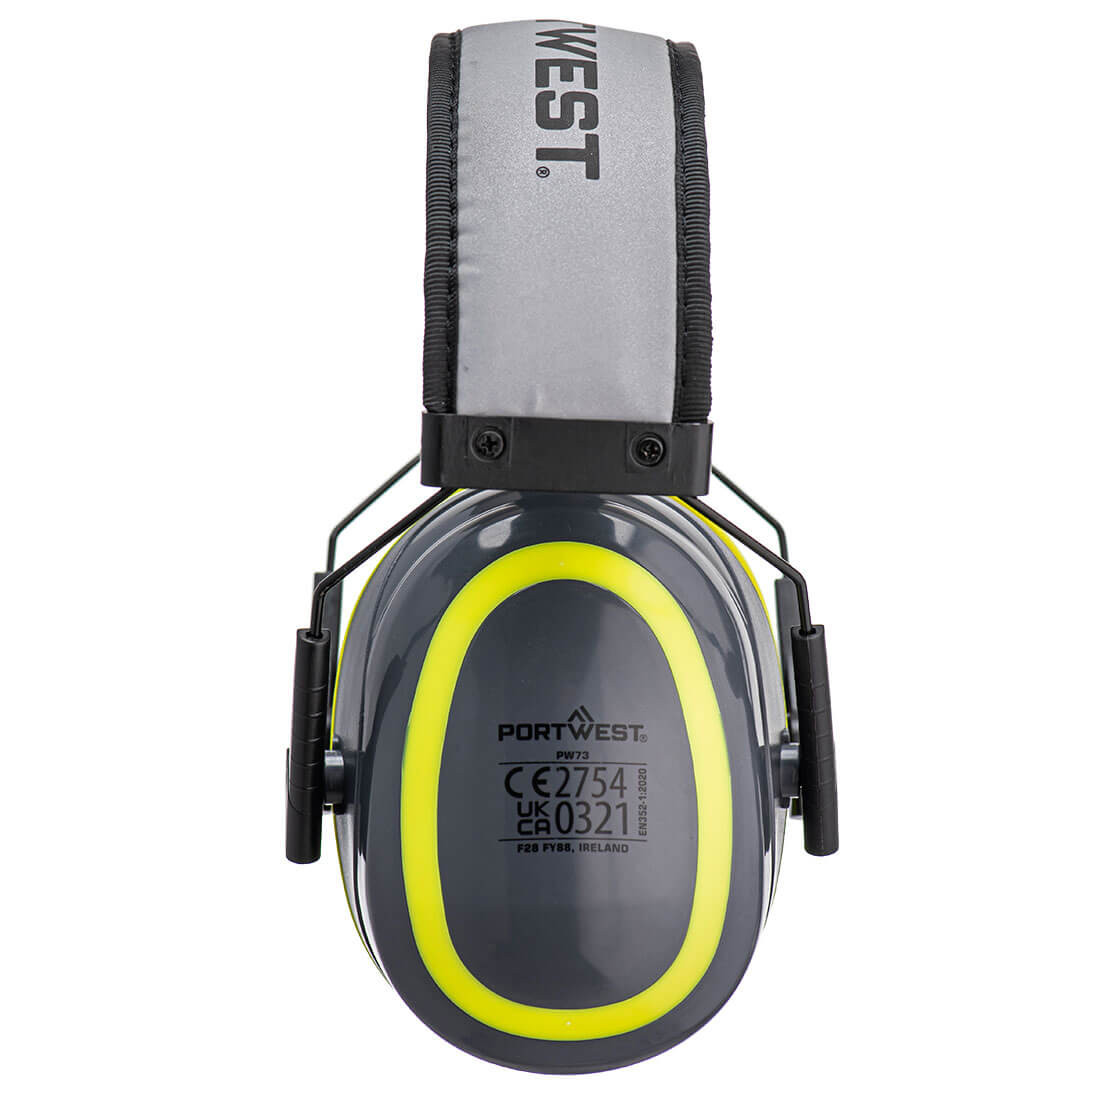 HV Extreme Ear Defenders Medium - Personal protection